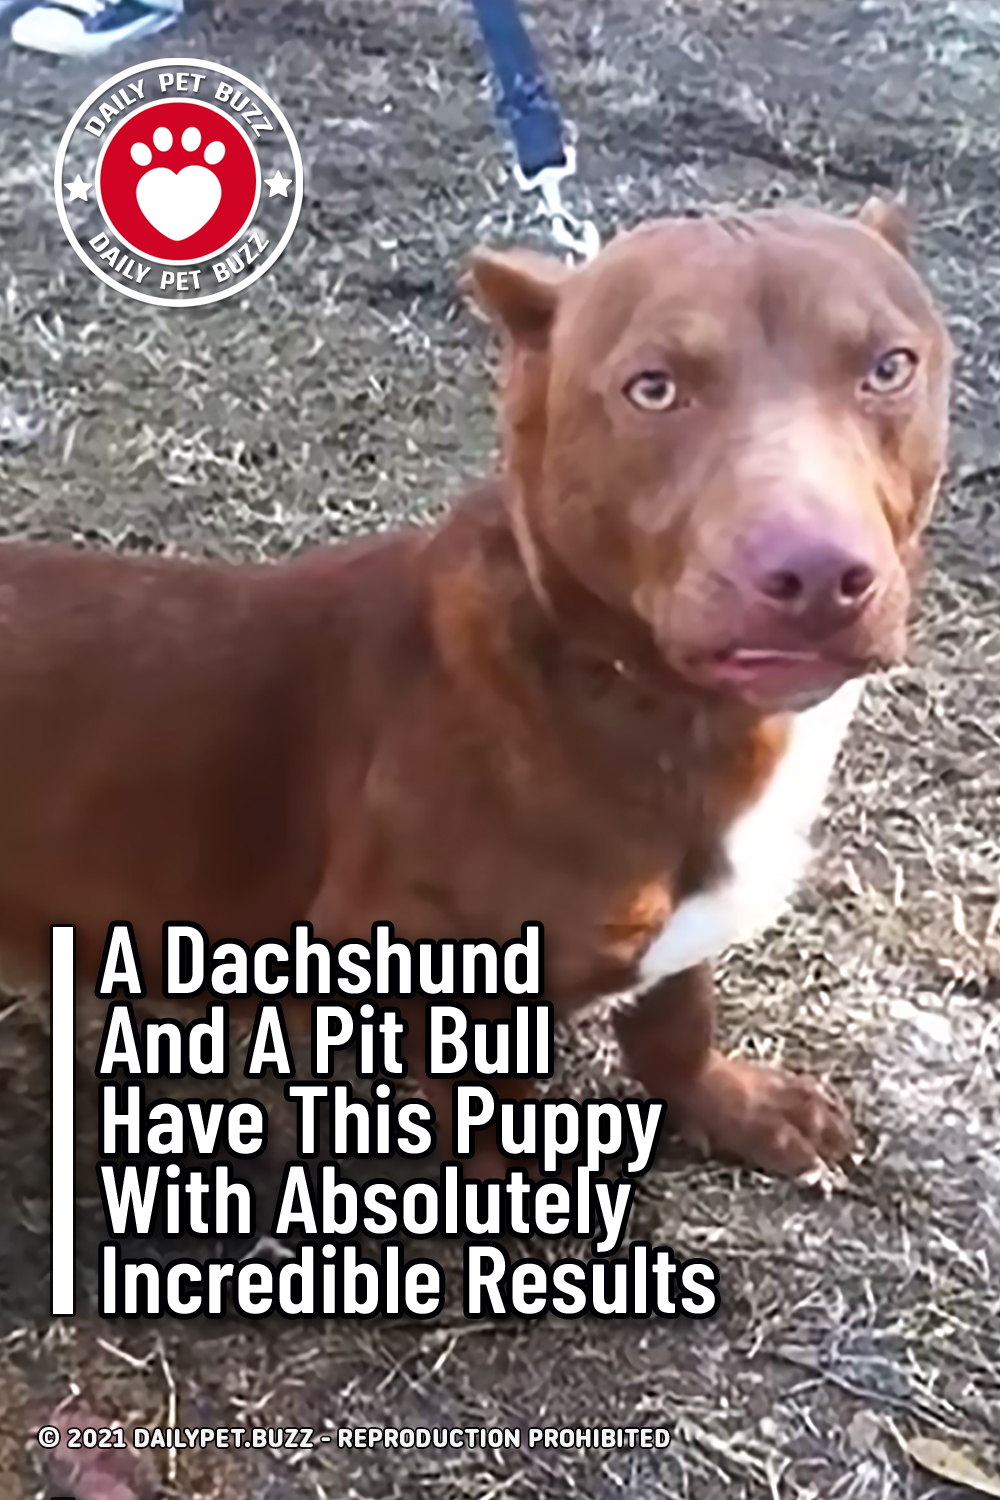 A Dachshund And A Pit Bull Have This Puppy With Absolutely Incredible Results